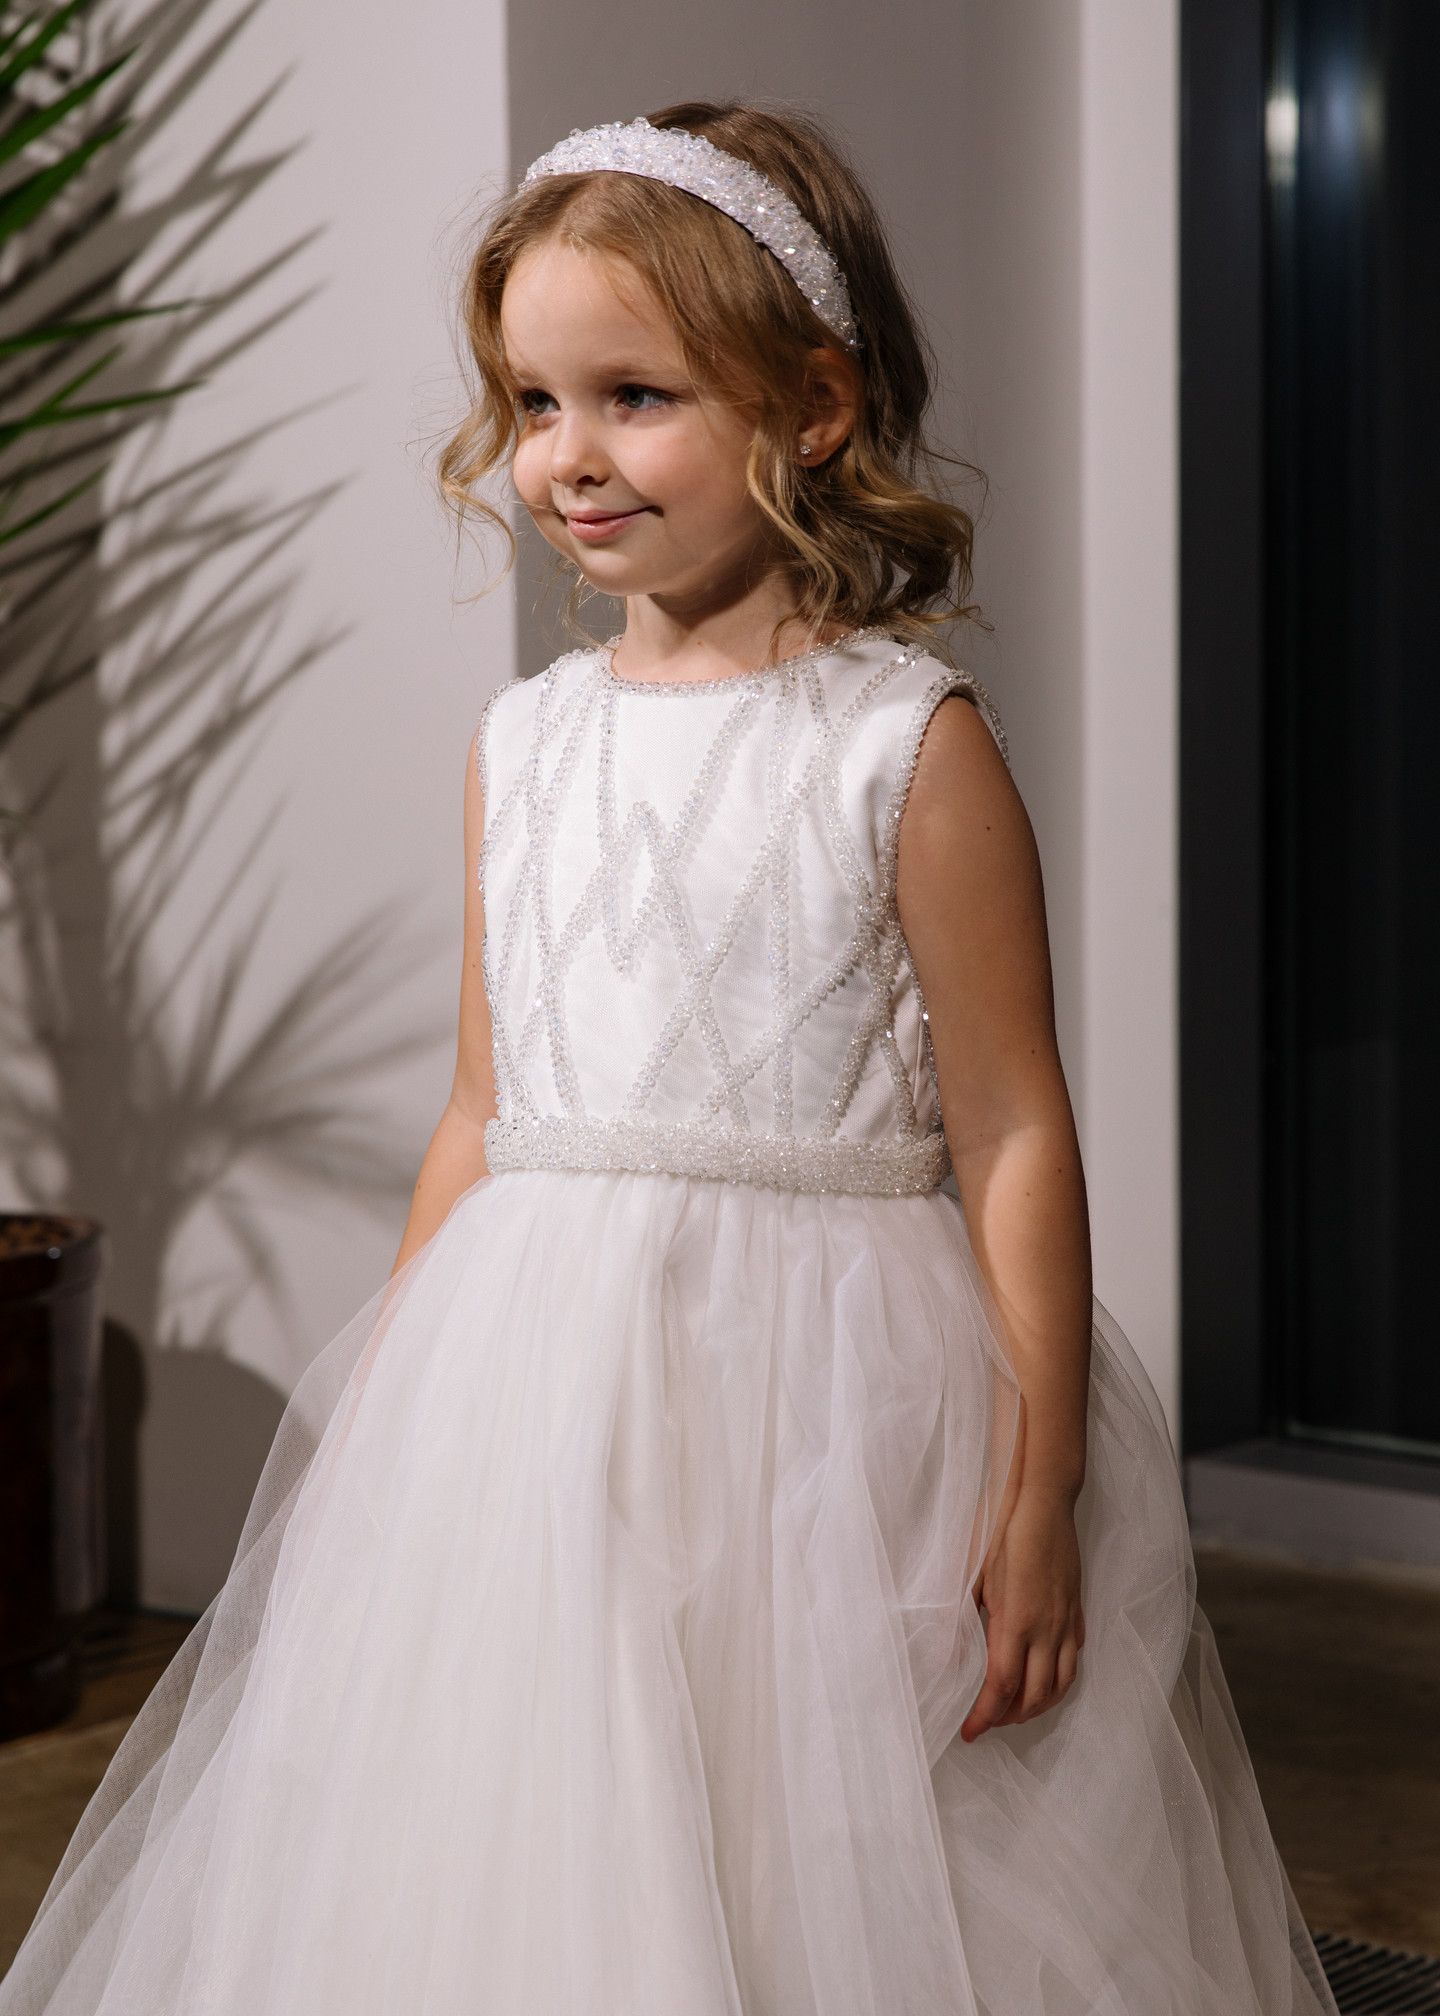 Lily flower girl dress, 2021, couture, child dress, child, off-white, tulle, embroidery, satin, flower girl